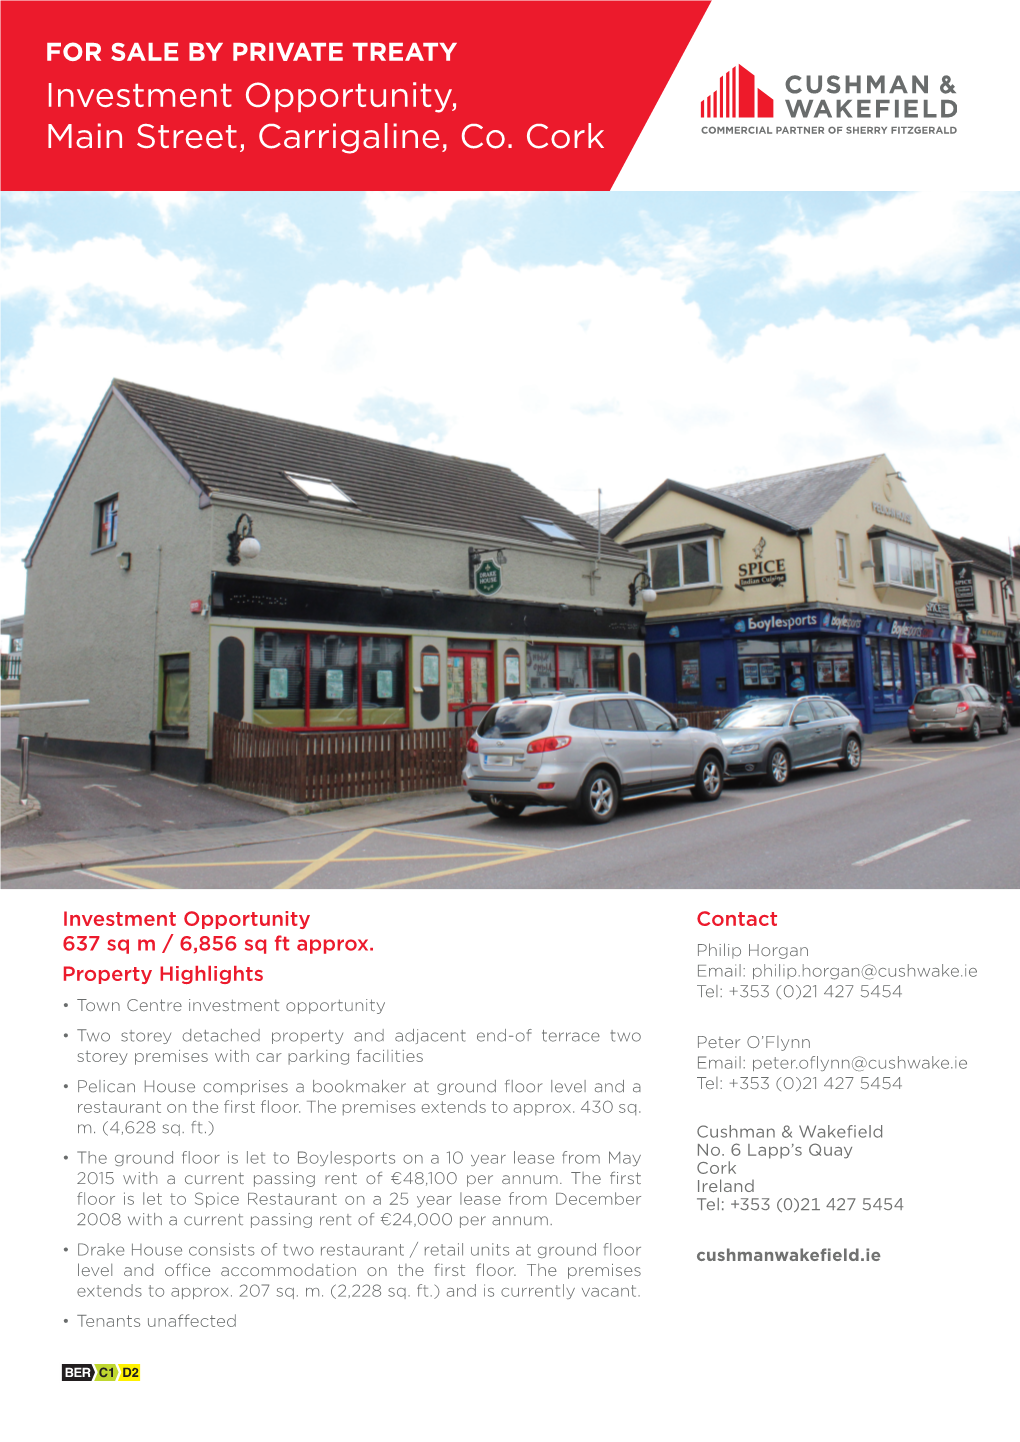 Investment Opportunity, Main Street, Carrigaline, Co. Cork